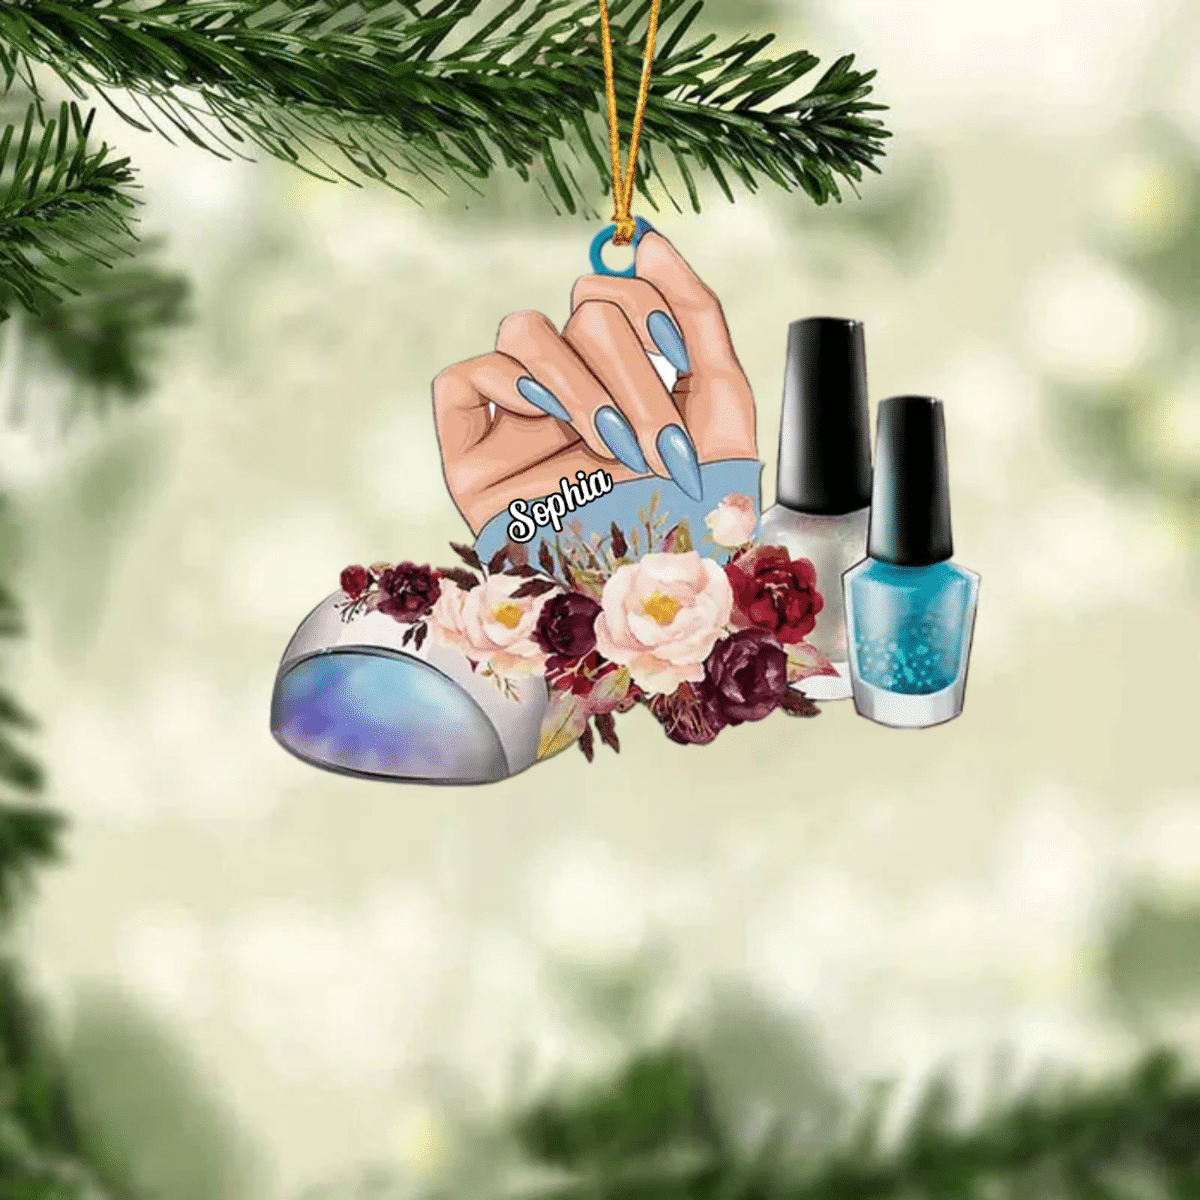 Personalized Nail Technician Manicurist Christmas Gift Custom Shaped Ornament for Nail Technician/ Gift for Her